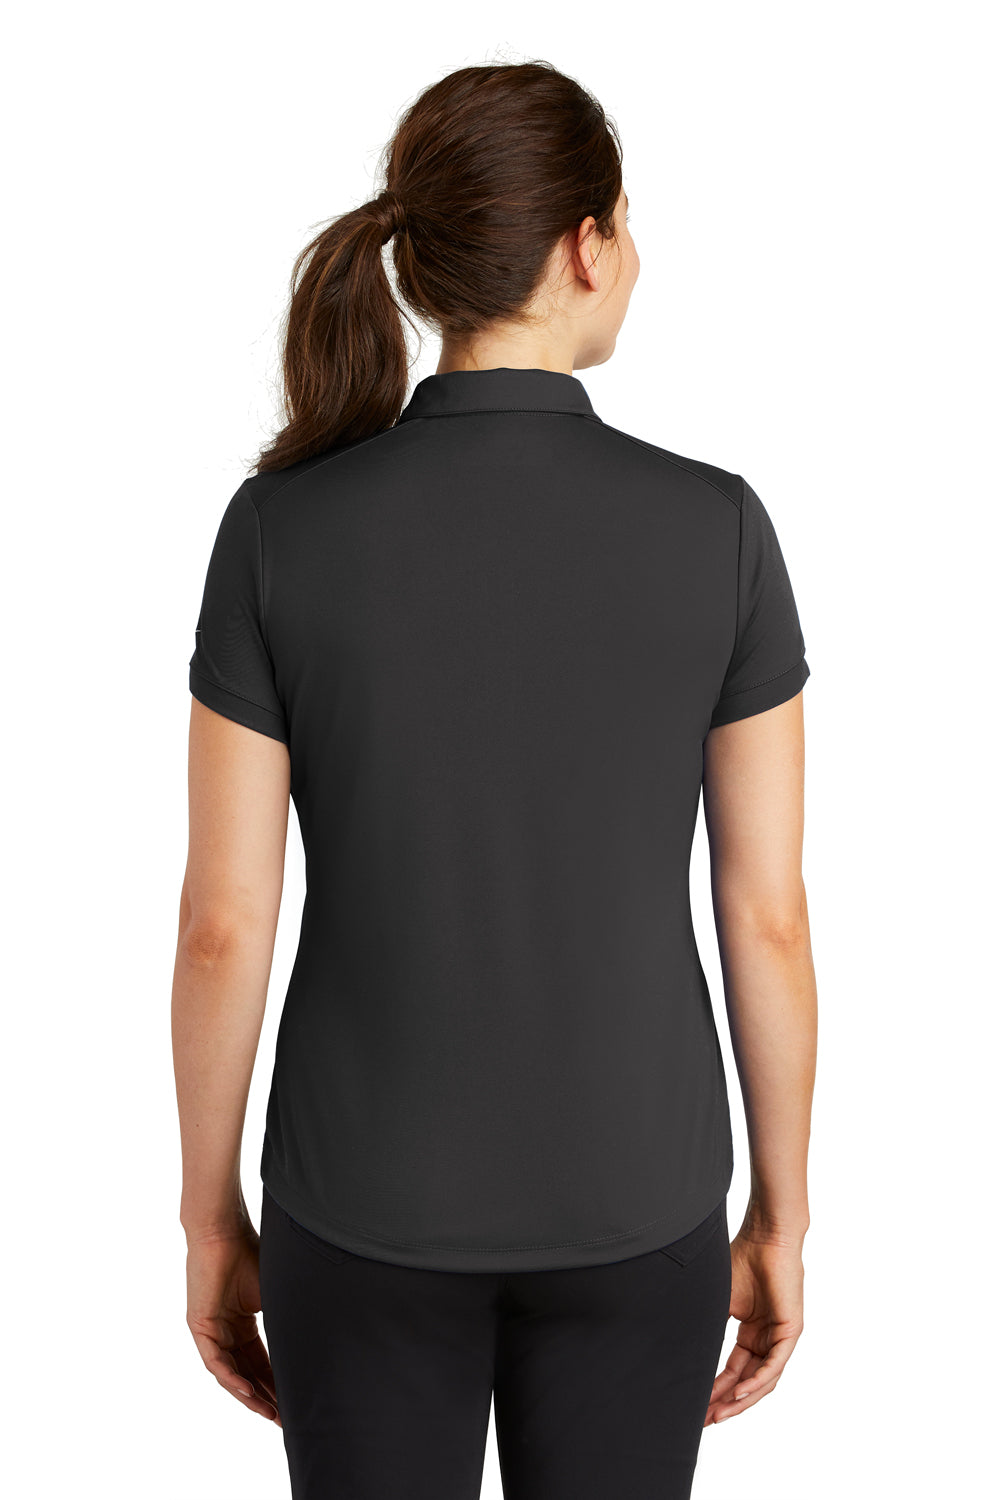 Nike 811807 Womens Players Dri-Fit Moisture Wicking Short Sleeve Polo Shirt Anthracite Grey Model Back